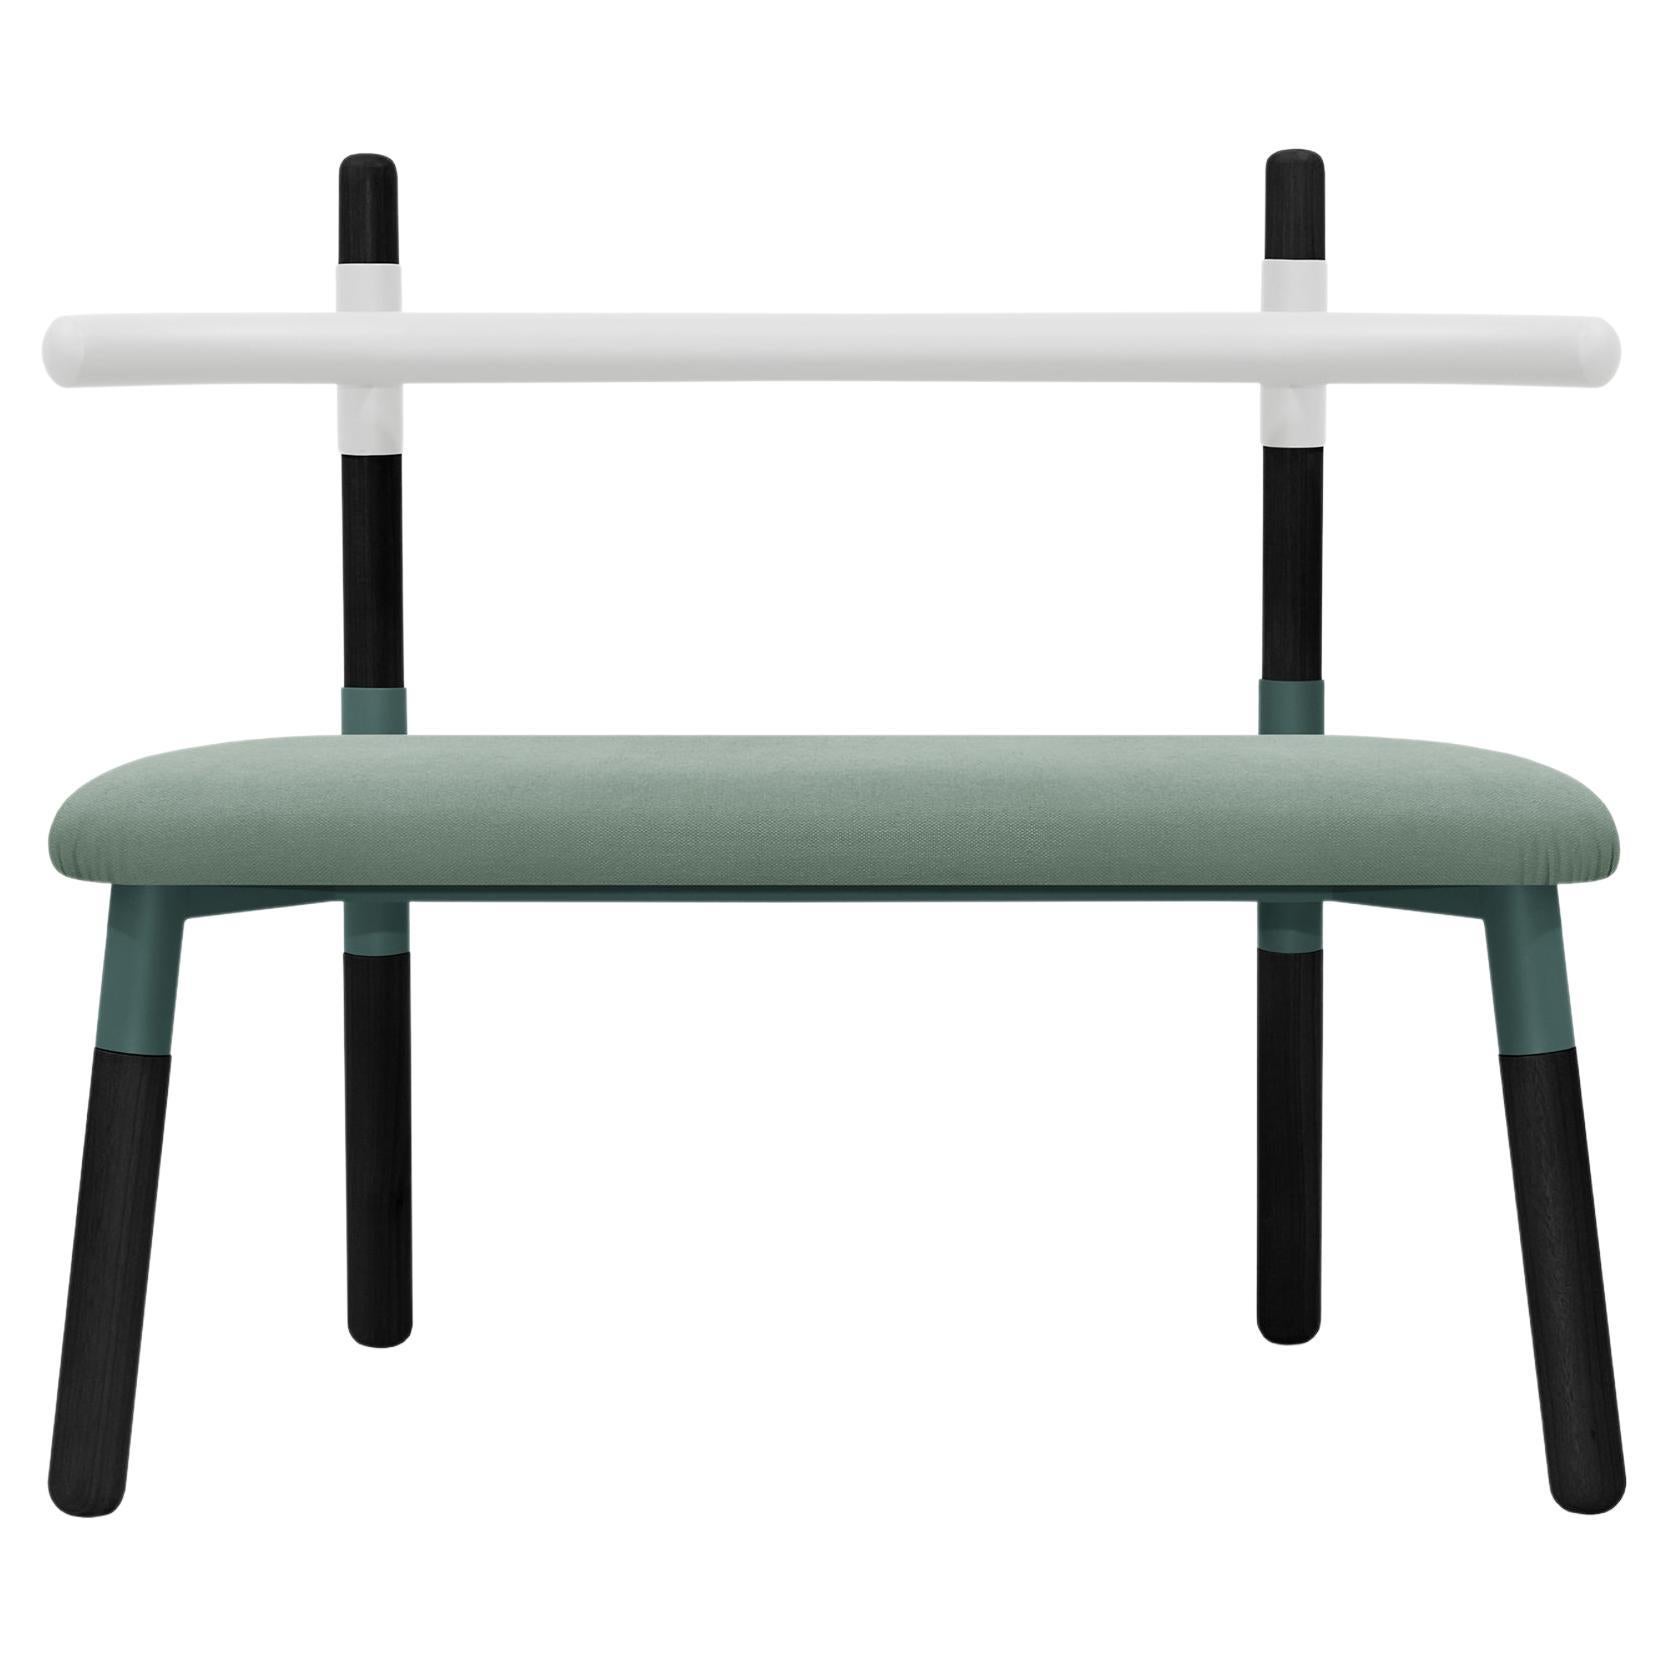 Upholstered PK14 Double Chair, Bicolor Structure, Ebonized Legs by Paulo Kobylka For Sale